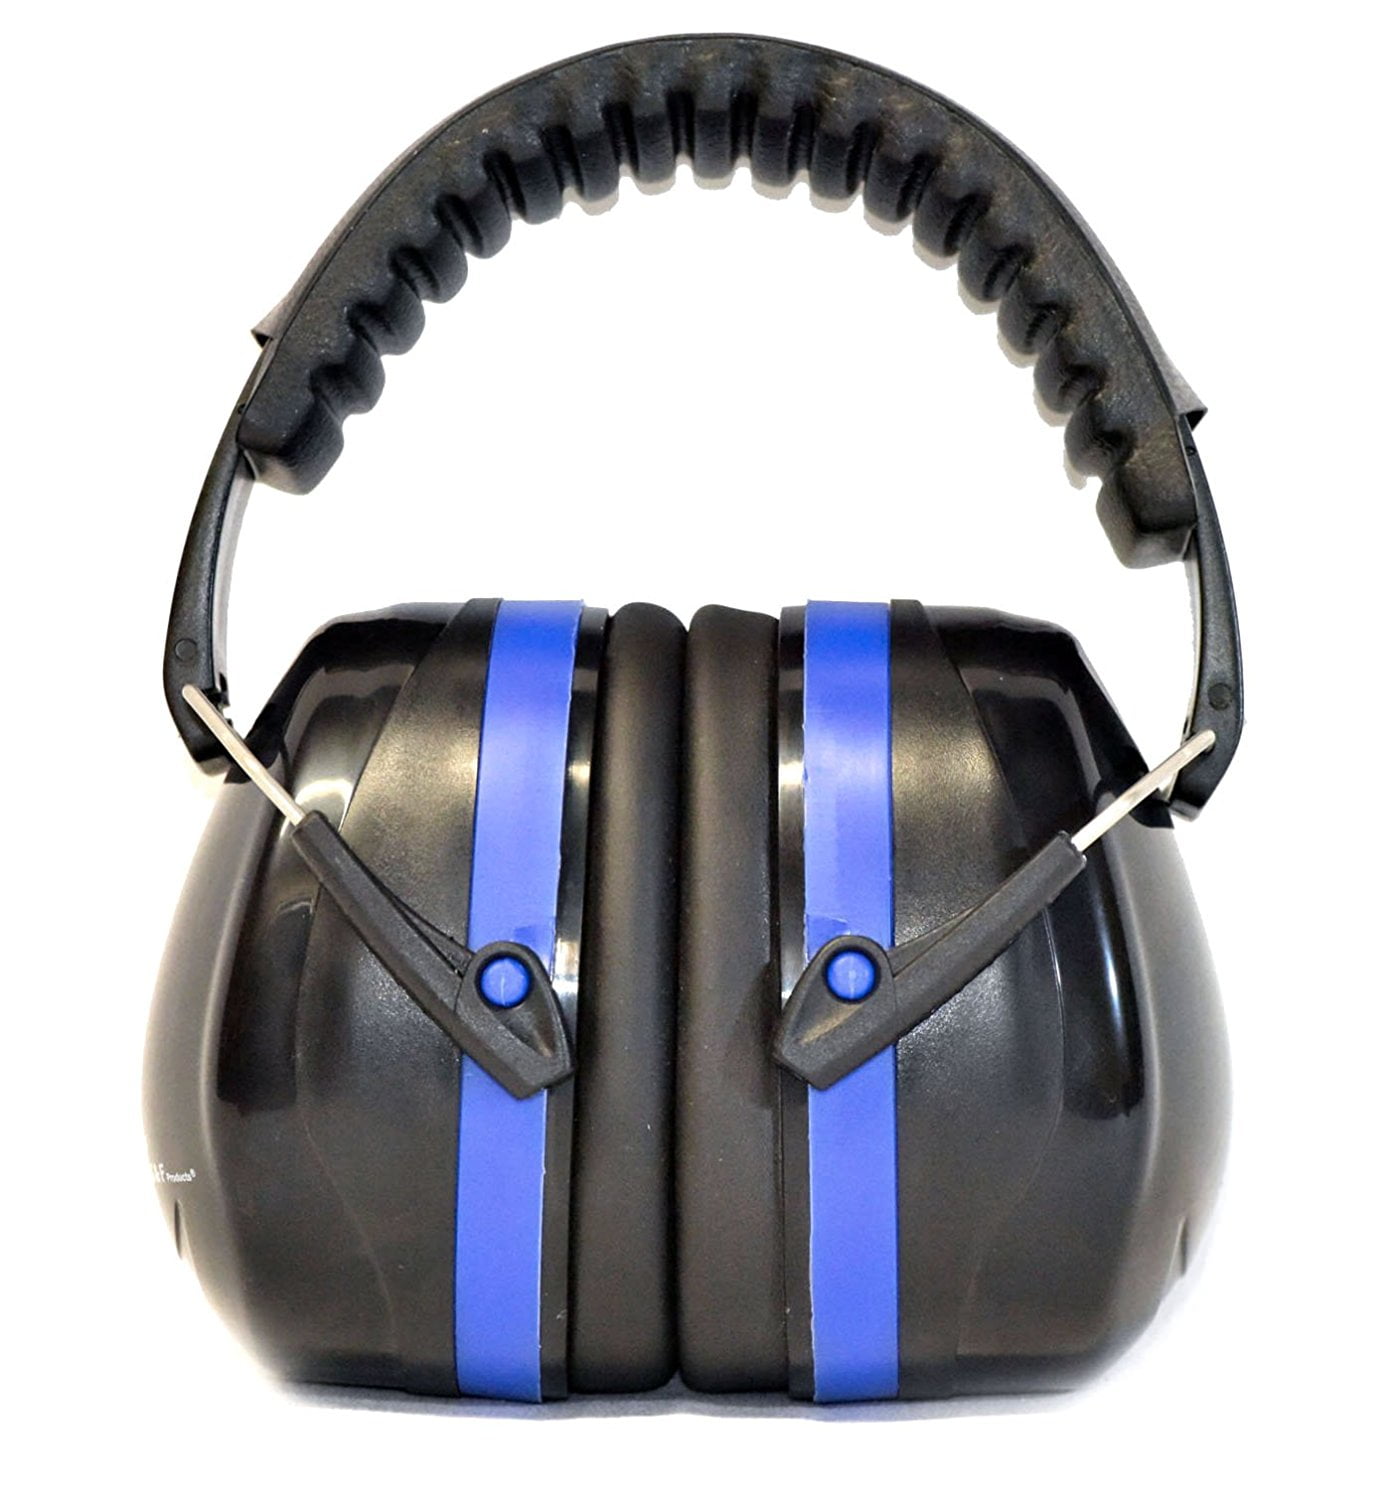 Ear Defenders 27dB Highest NRR Safety Ear Muffs Shooting Hearing Adults/Kids B2Z 